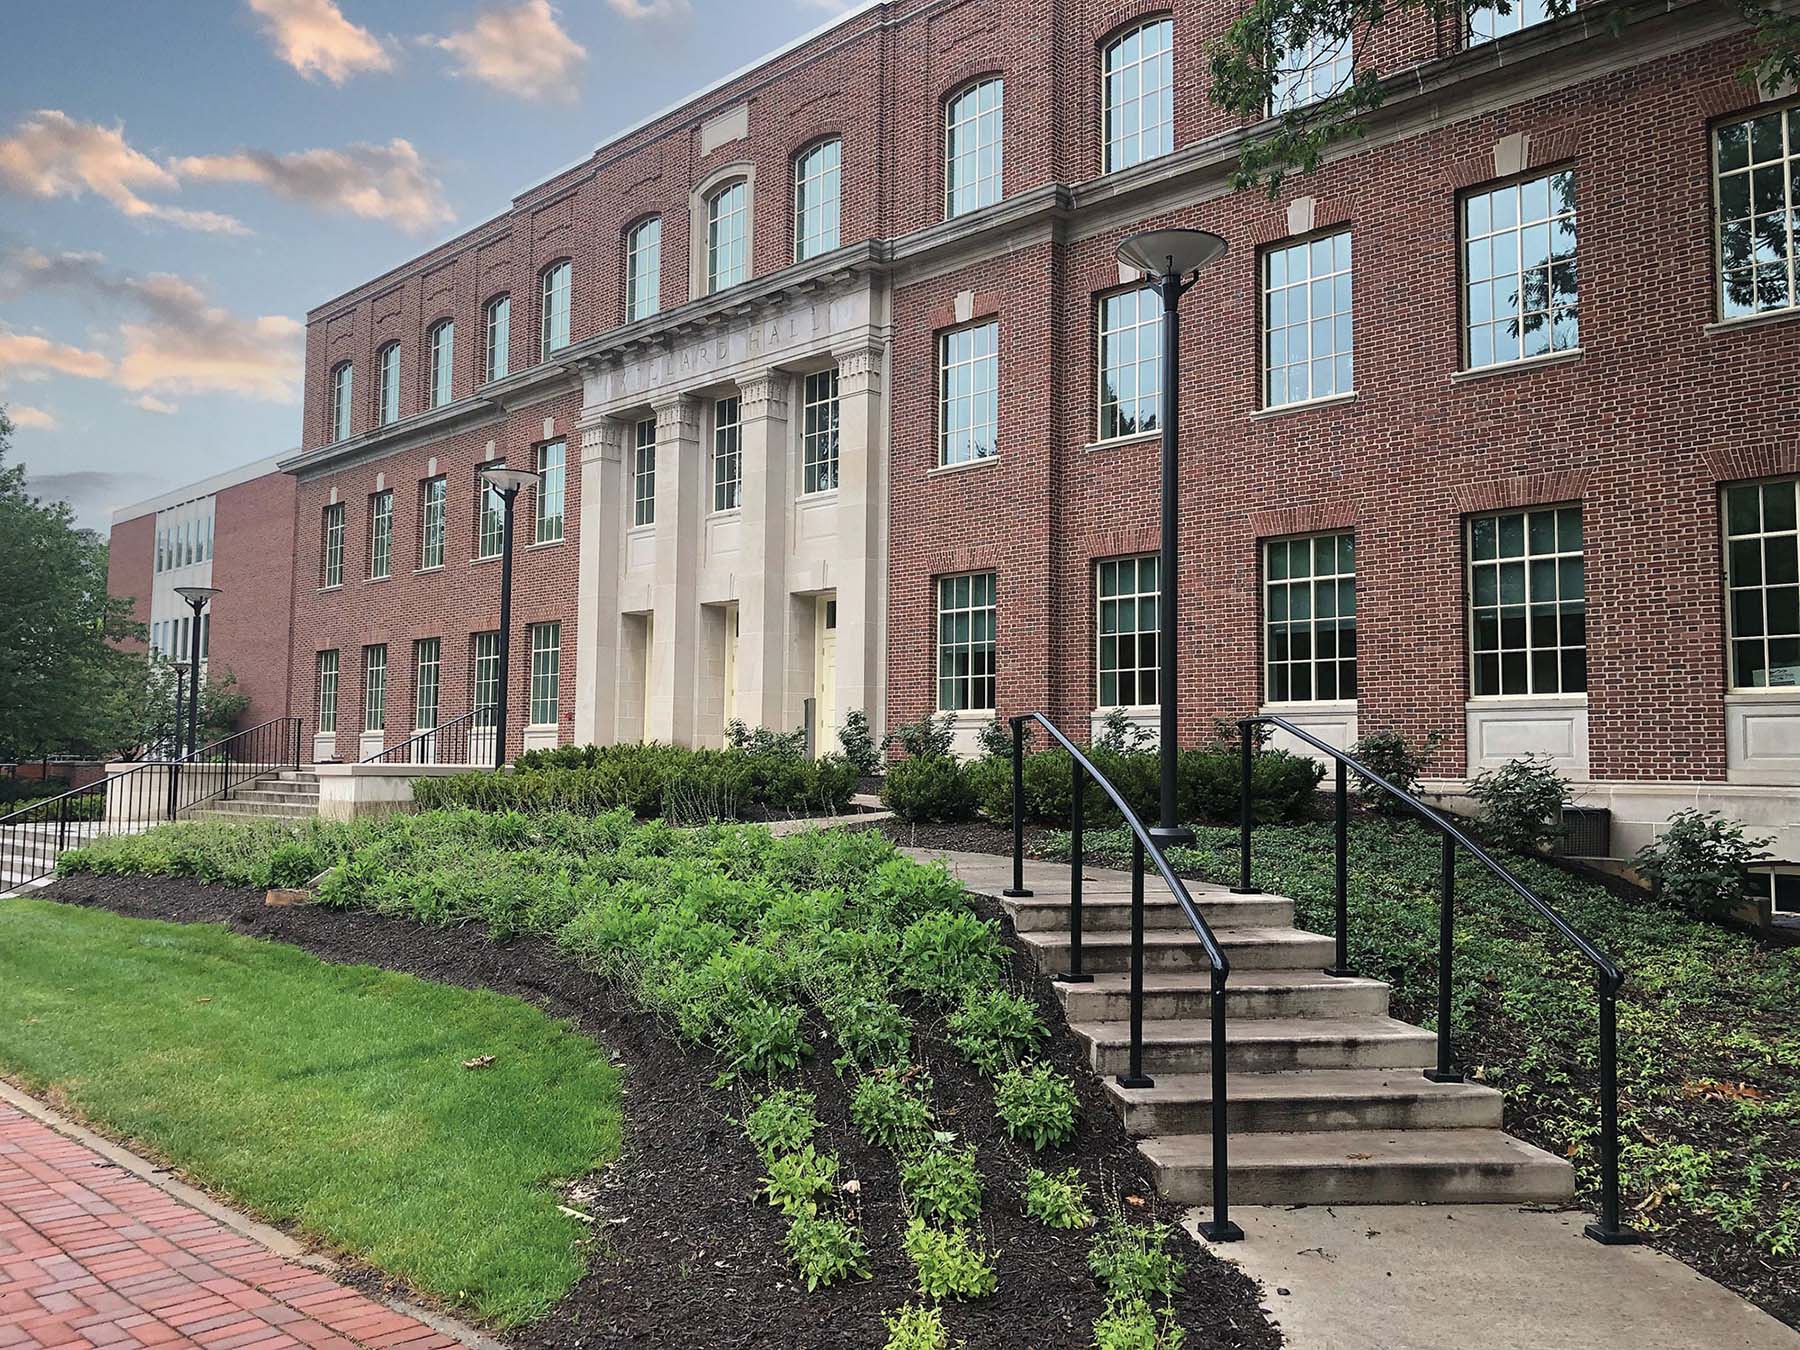 A subtle background photo of the front of Willard Building, a several story brick classroom building with four columns at the ntrance. Green lawn and bushes in the foreground.